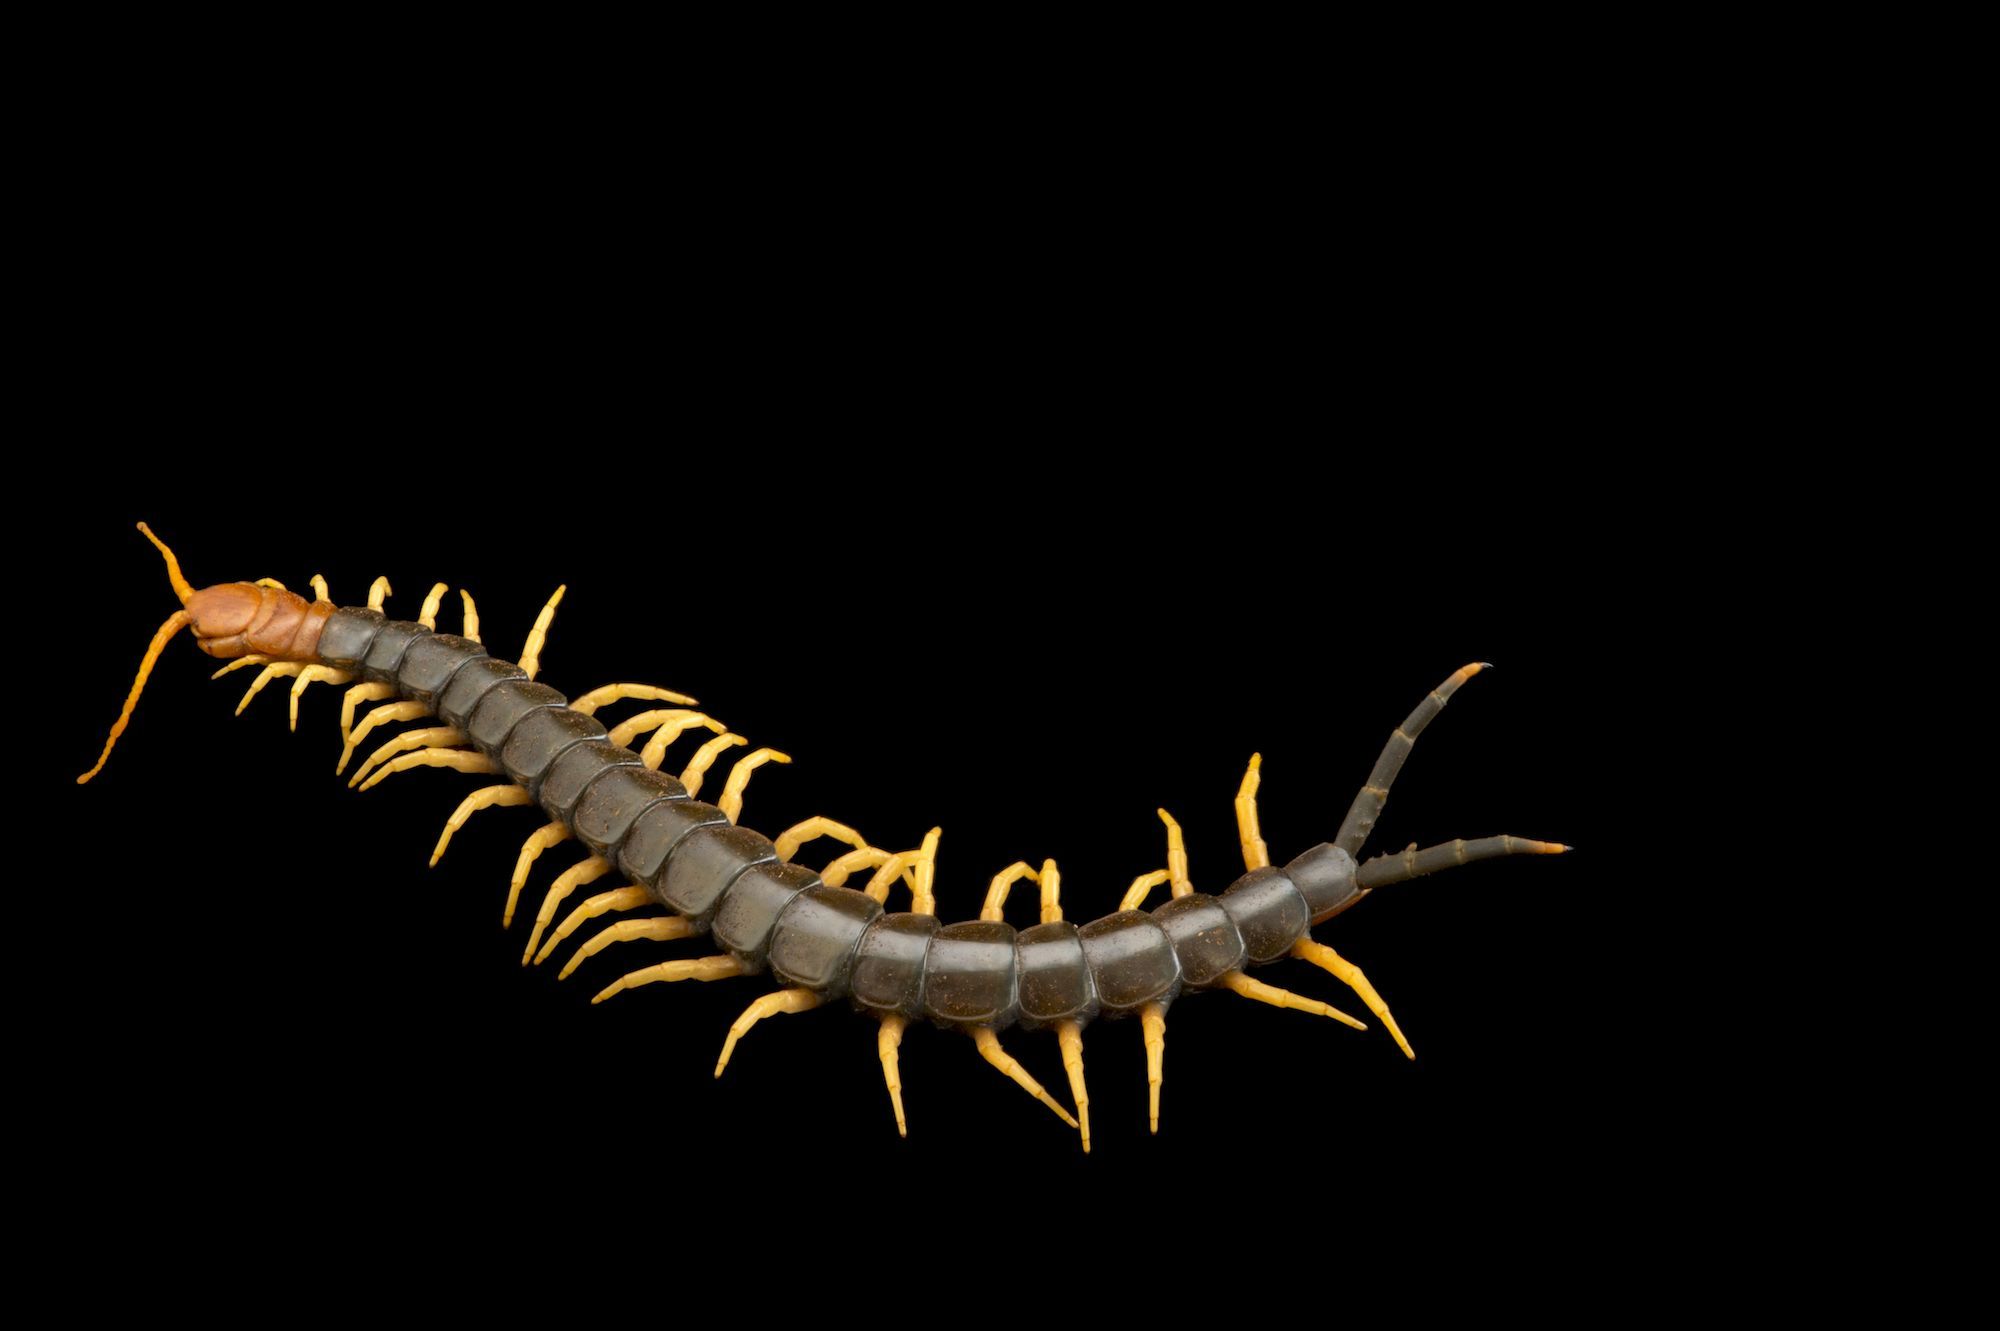 Photo Ark Texas Redheaded Centipede National Geographic Society. www.nation...